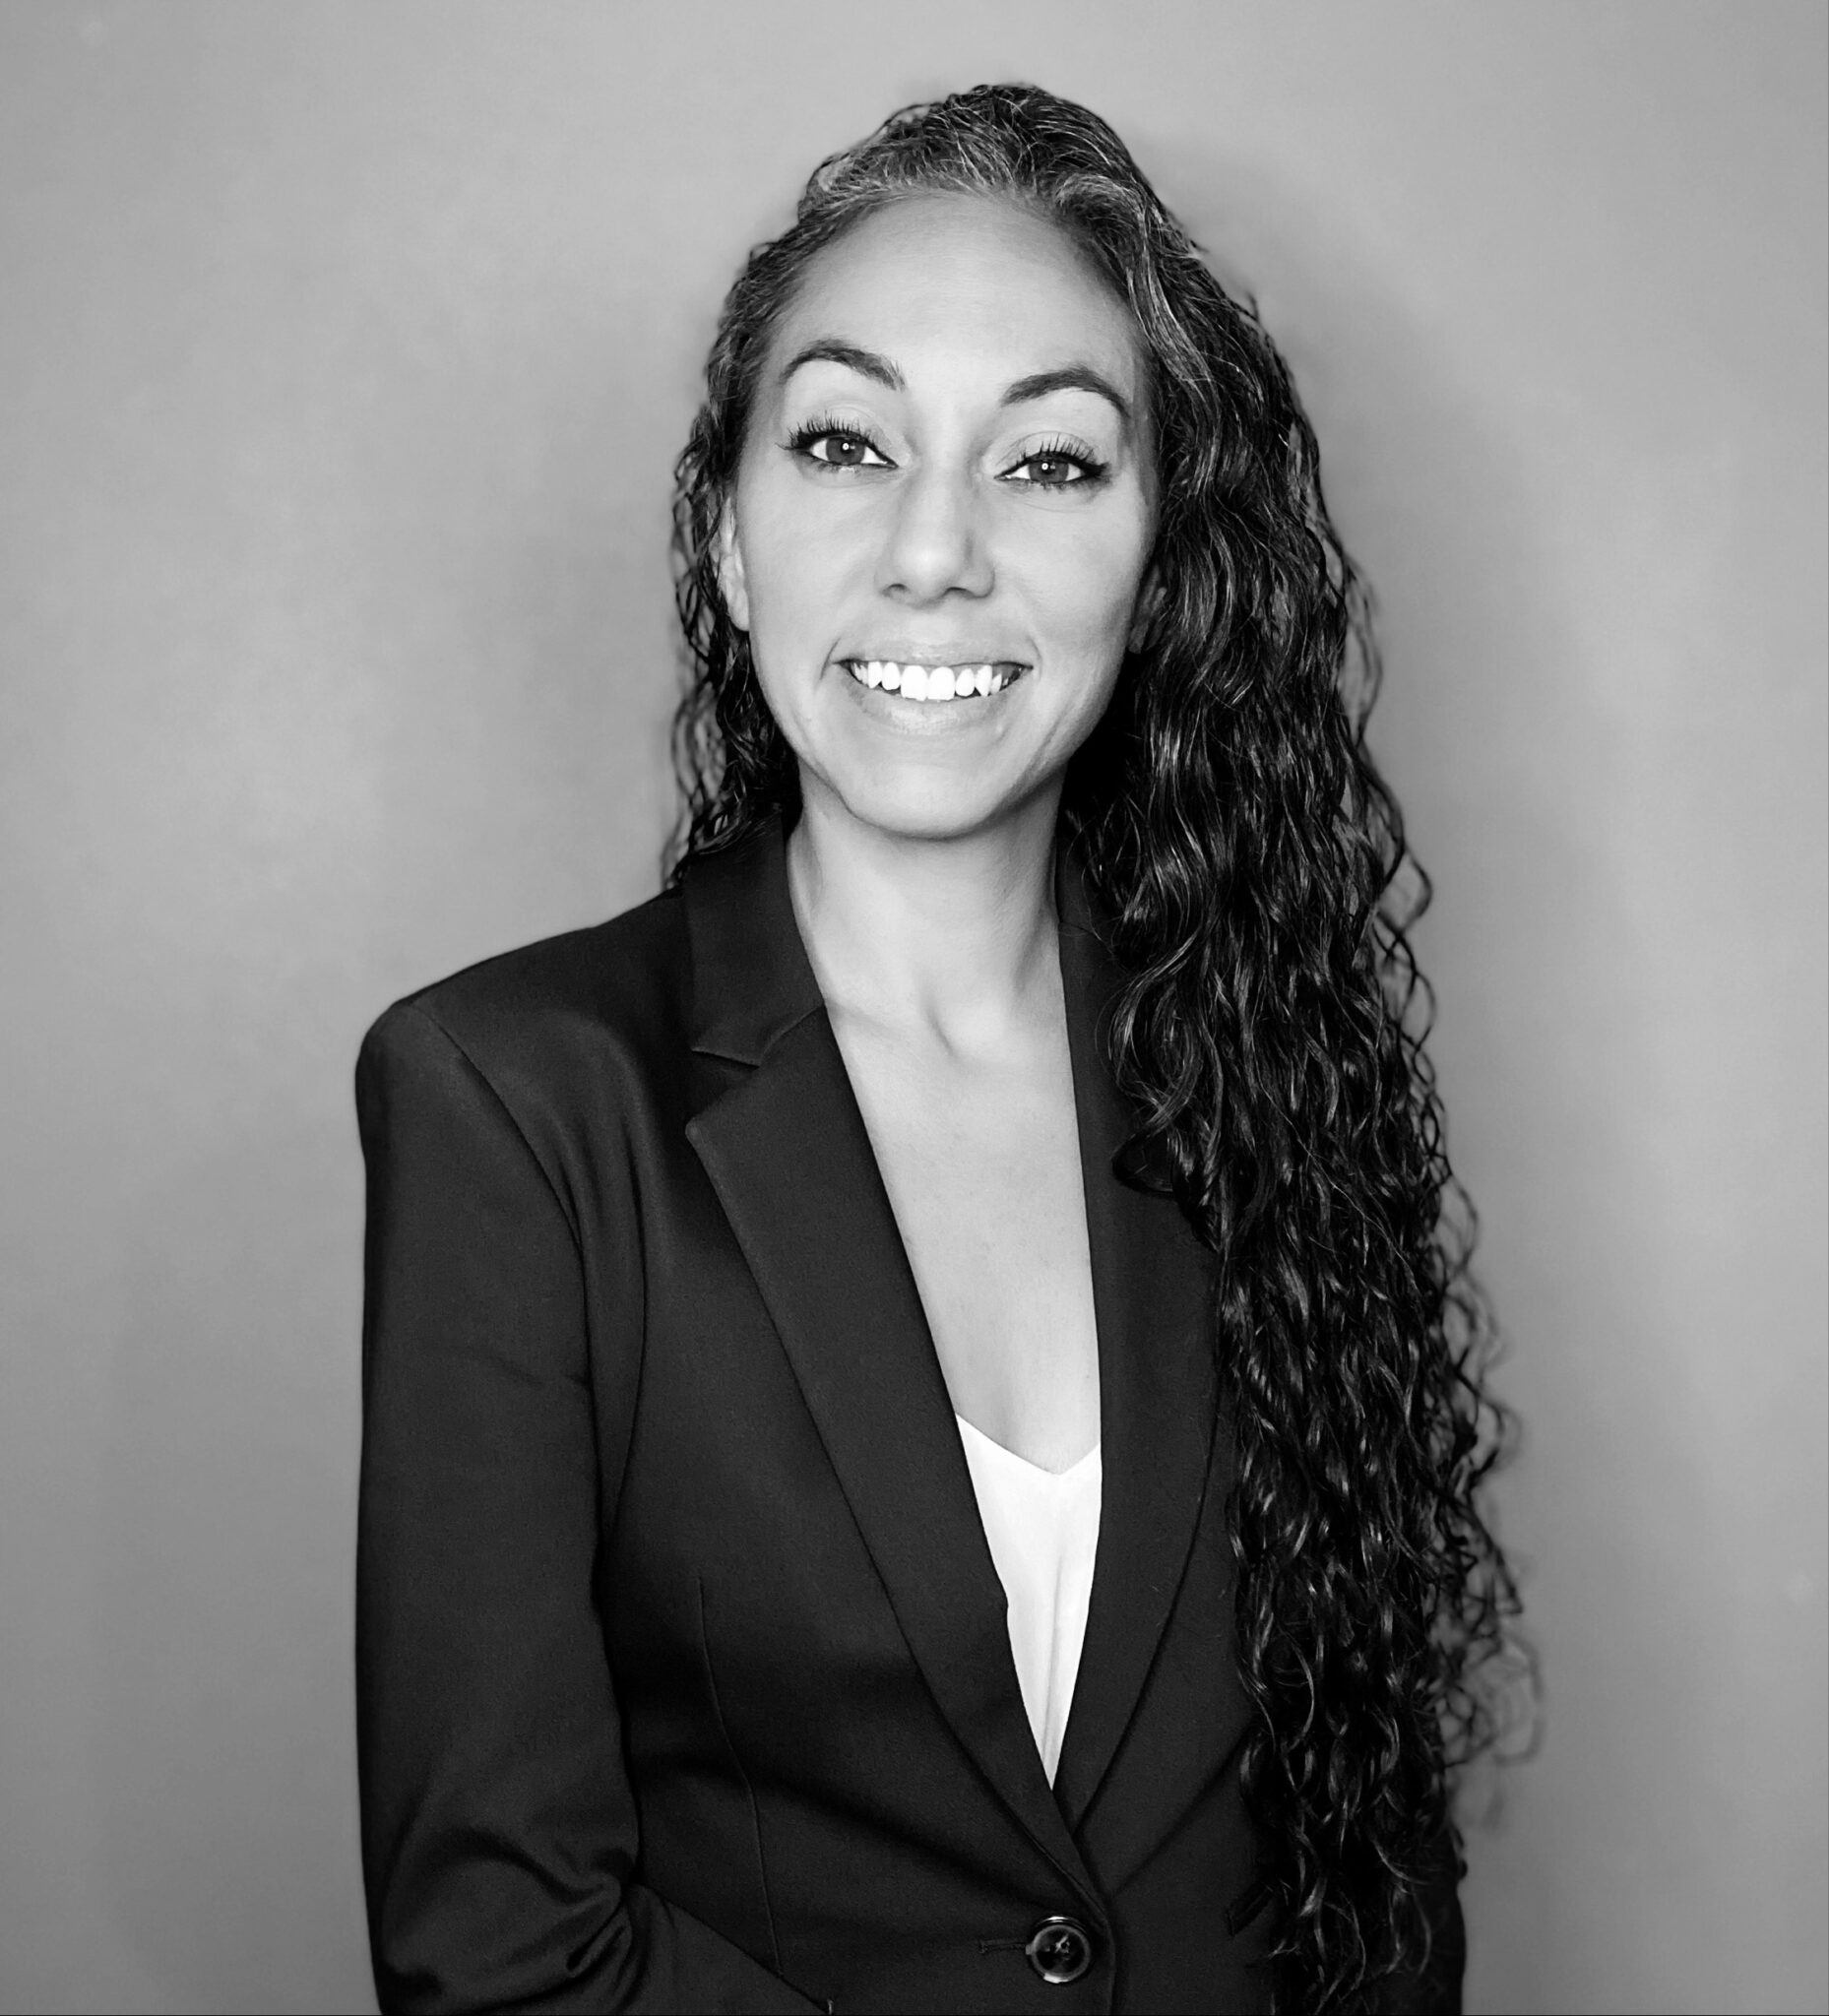 Picture of Attorney Sarah Naccache in Black and White